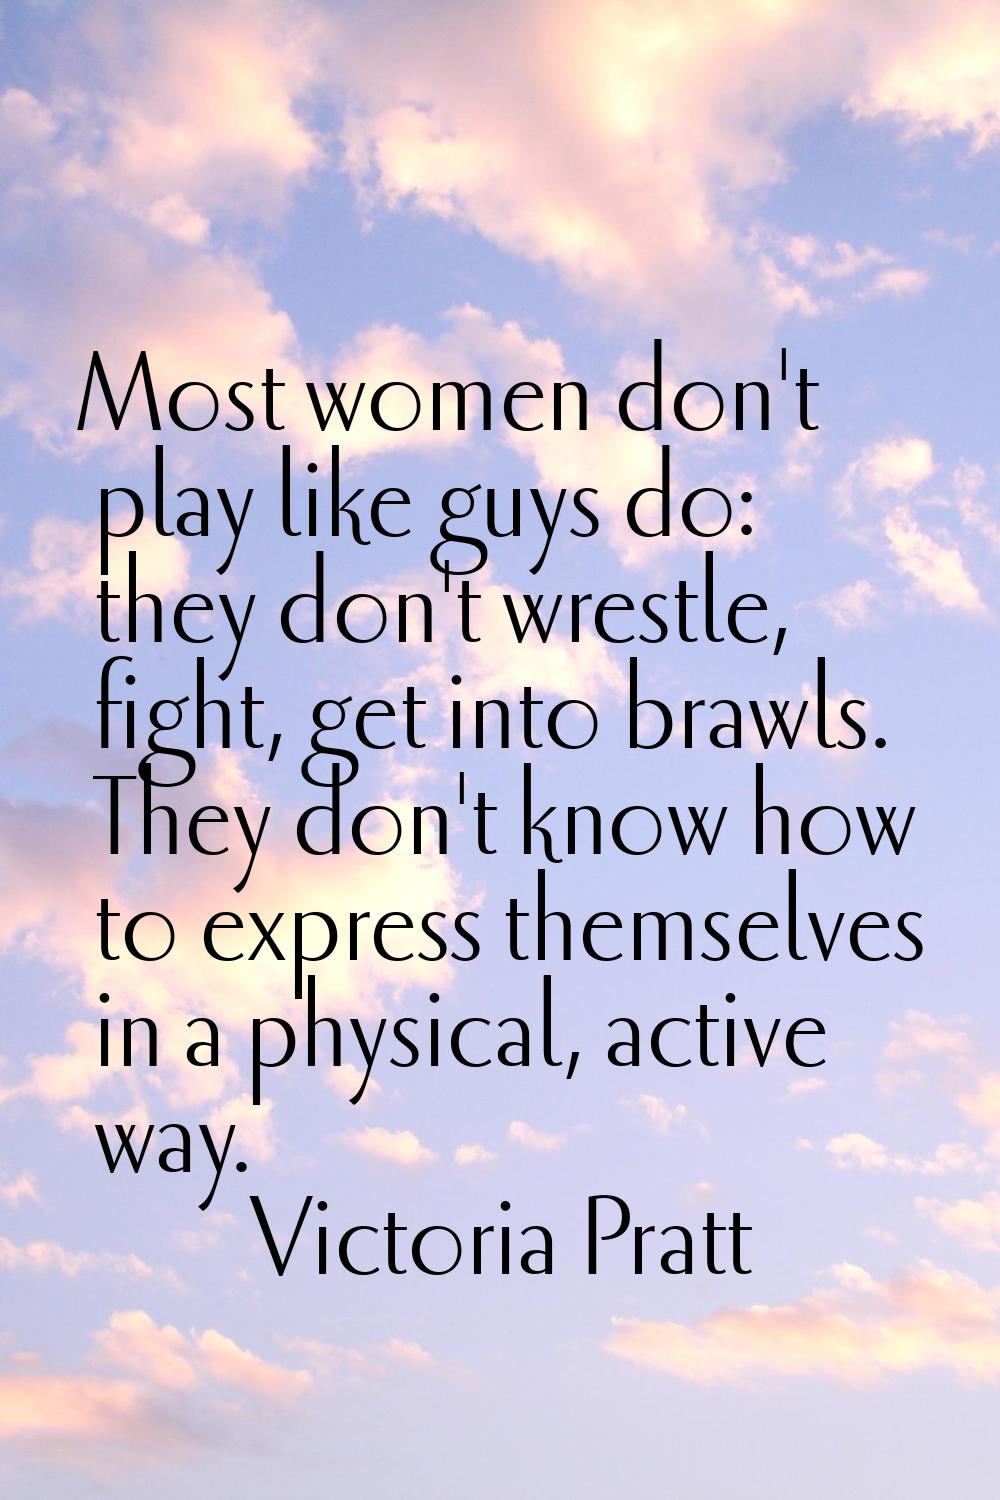 Most women don't play like guys do: they don't wrestle, fight, get into brawls. They don't know how